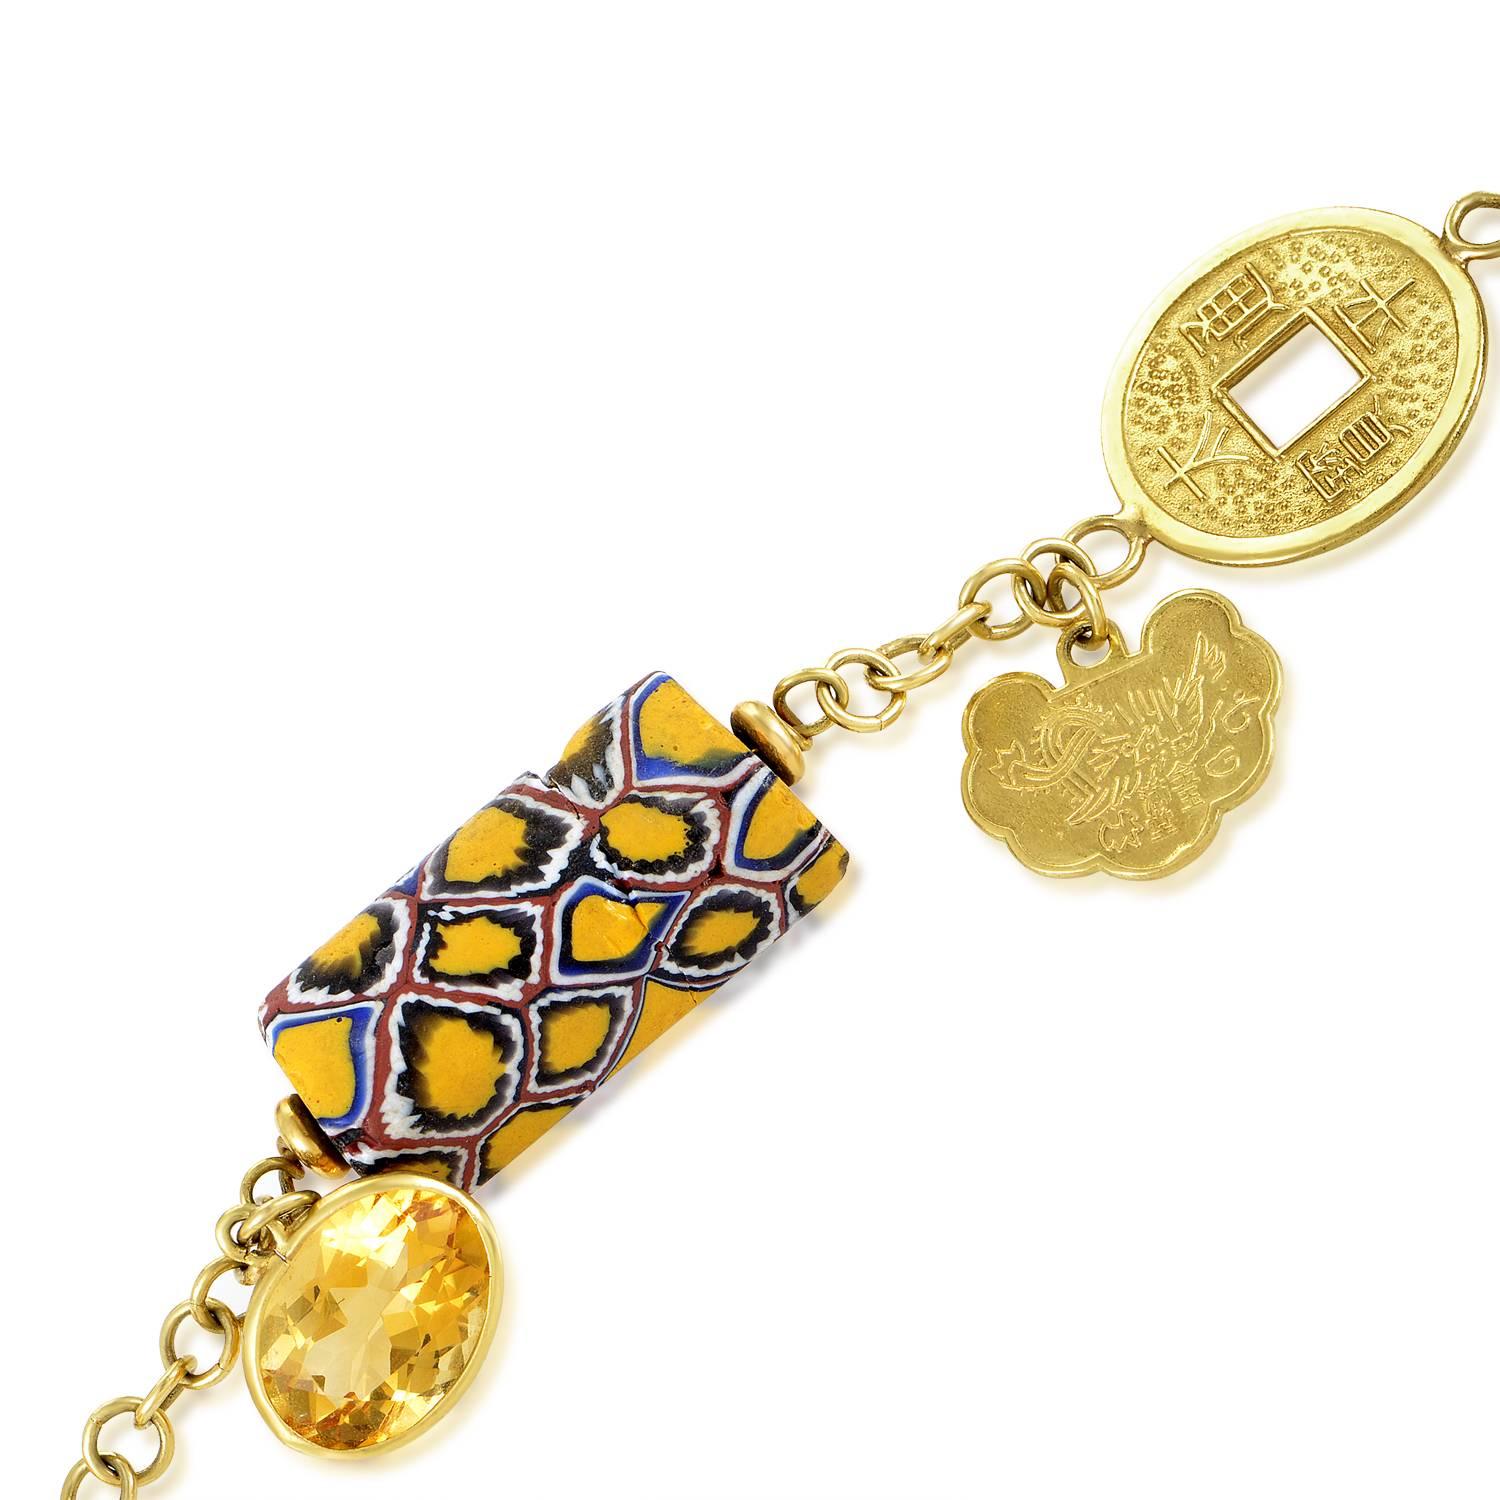 A breathtaking composition of diverse and pleasantly harmonious charms, this exceptional necklace from Dada is made of 18K yellow gold and boasts sparkling citrine stones, marvelous resin ornaments and adorable Chinese coins for a fantastic appeal.